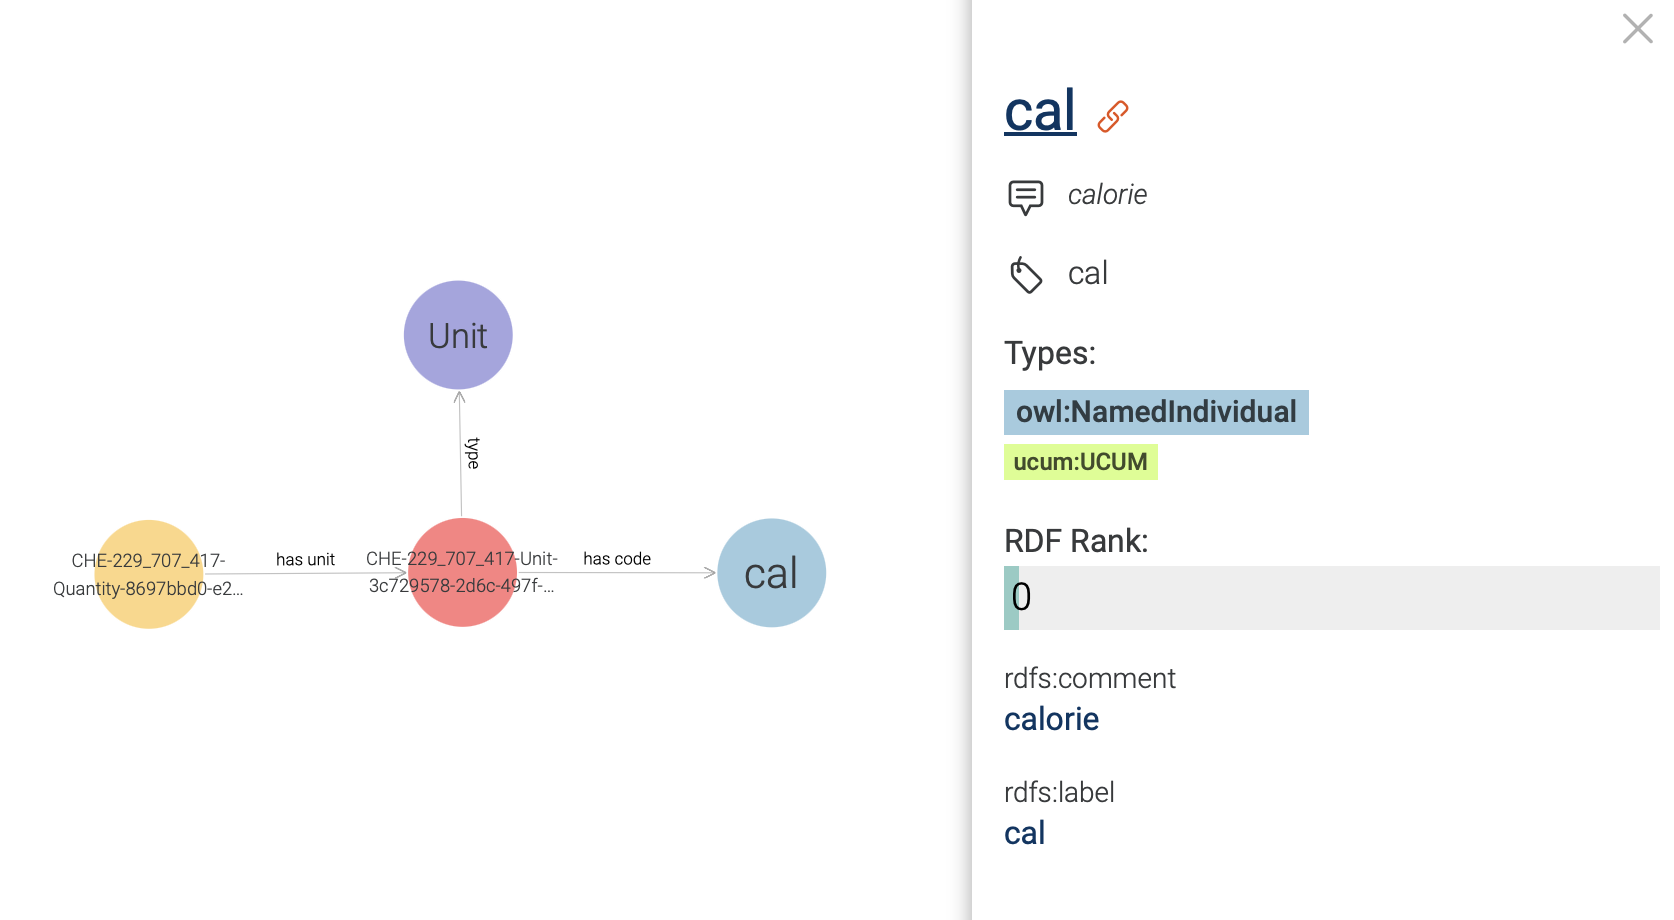 Exploring an UCUM code instance in a visual graph.